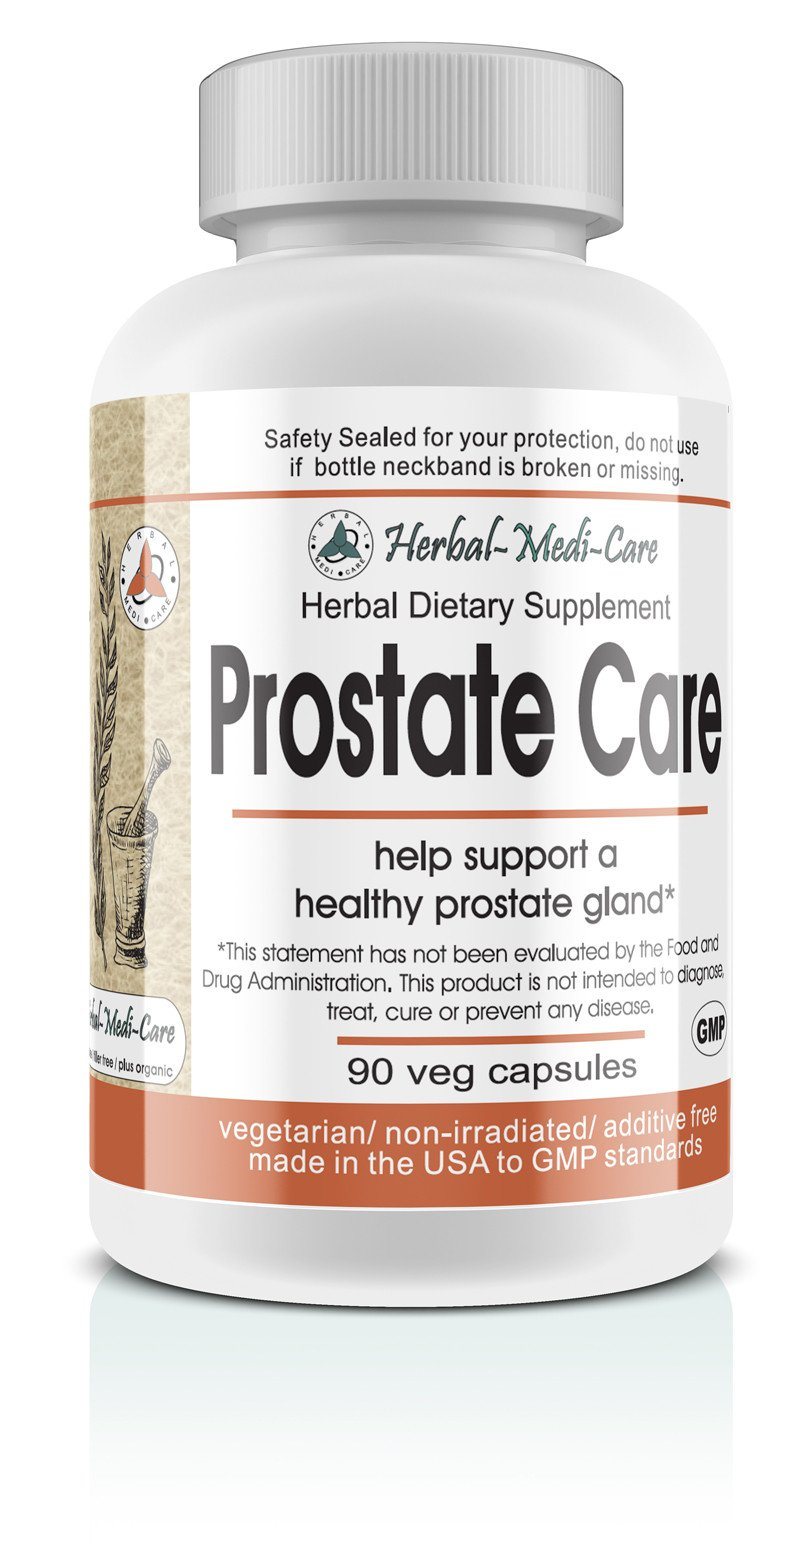 Herbal-Medi-Care Whole Food Prostate Care Vegetarian Capsules; 90-Count - Herbal-Medi-Care Whole Food Prostate Care Vegetarian Capsules; 90-Count - Herbal-Medi-Care Whole Food Prostate Care Vegetarian Capsules; 90-Count